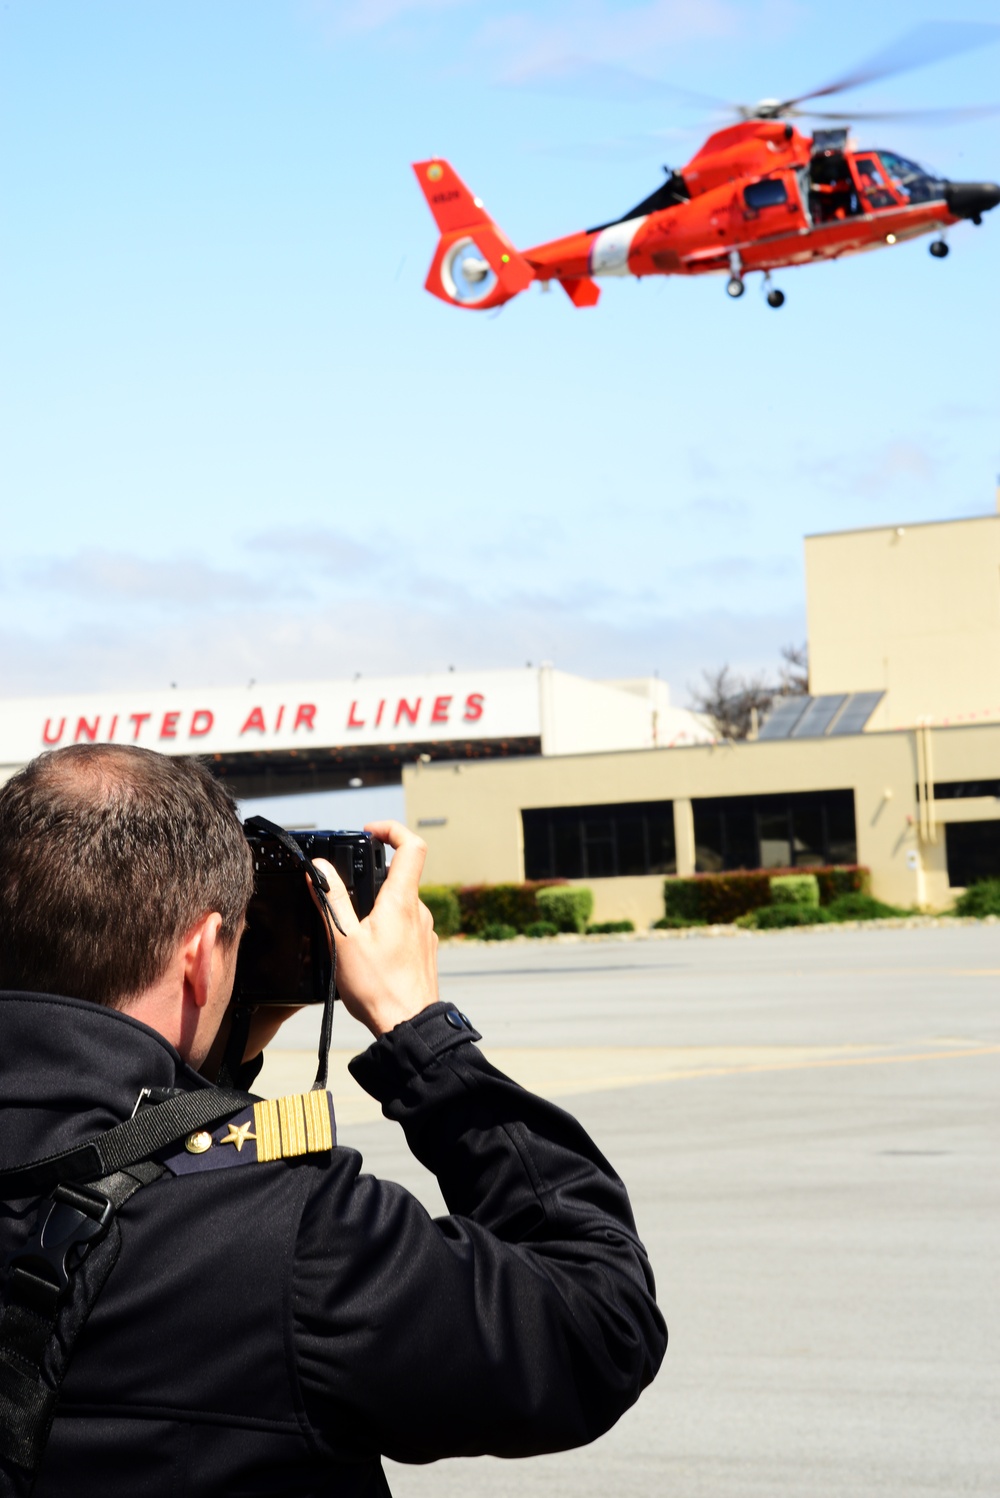 A NATO officer takes a photo of a helicopter demonstration at Coast Guard Air Station San Francisco